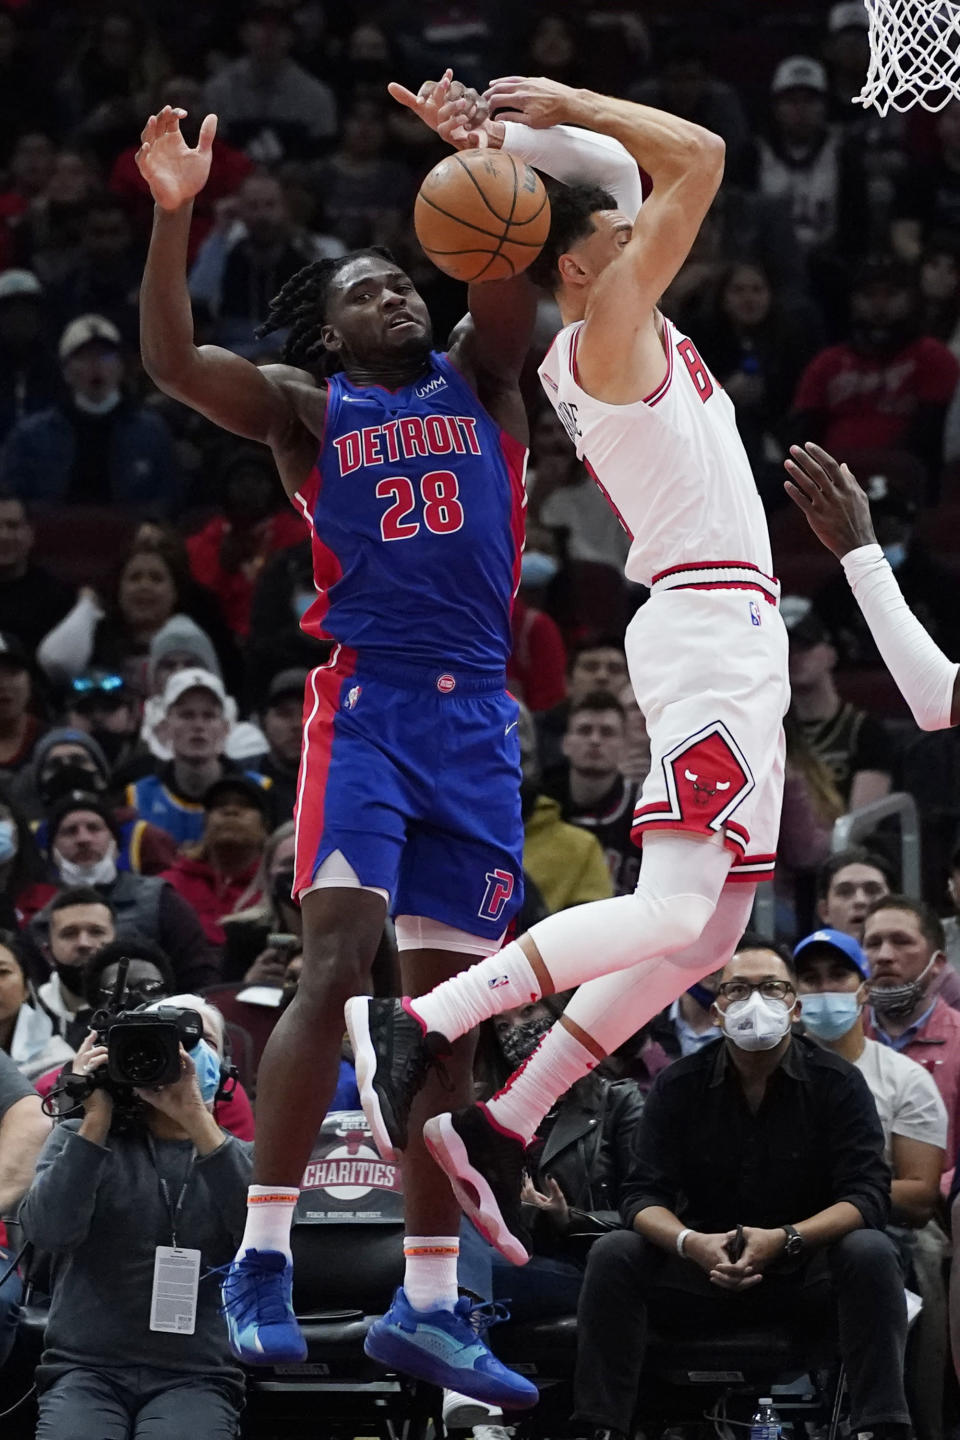 Detroit Pistons center Isaiah Stewart, left, blocks a shot by Chicago Bulls guard Zach LaVine during the first half of an NBA basketball game in Chicago, Saturday, Oct. 23, 2021. (AP Photo/Nam Y. Huh)